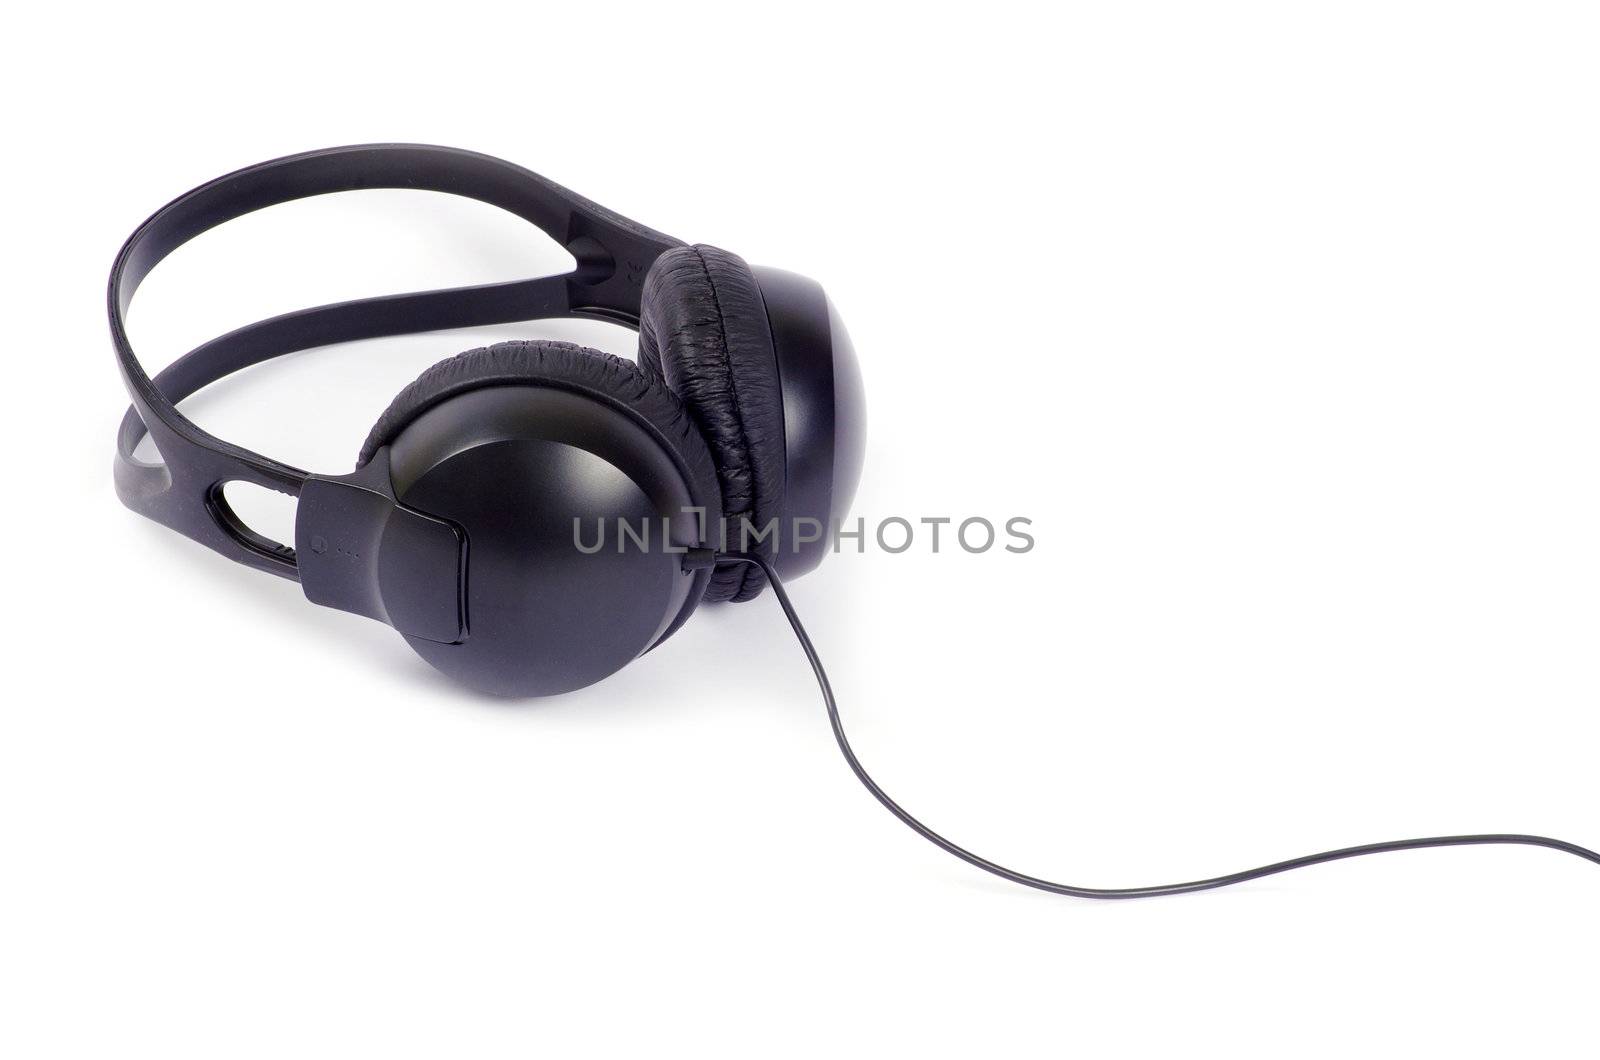 Headphones isolated on a white